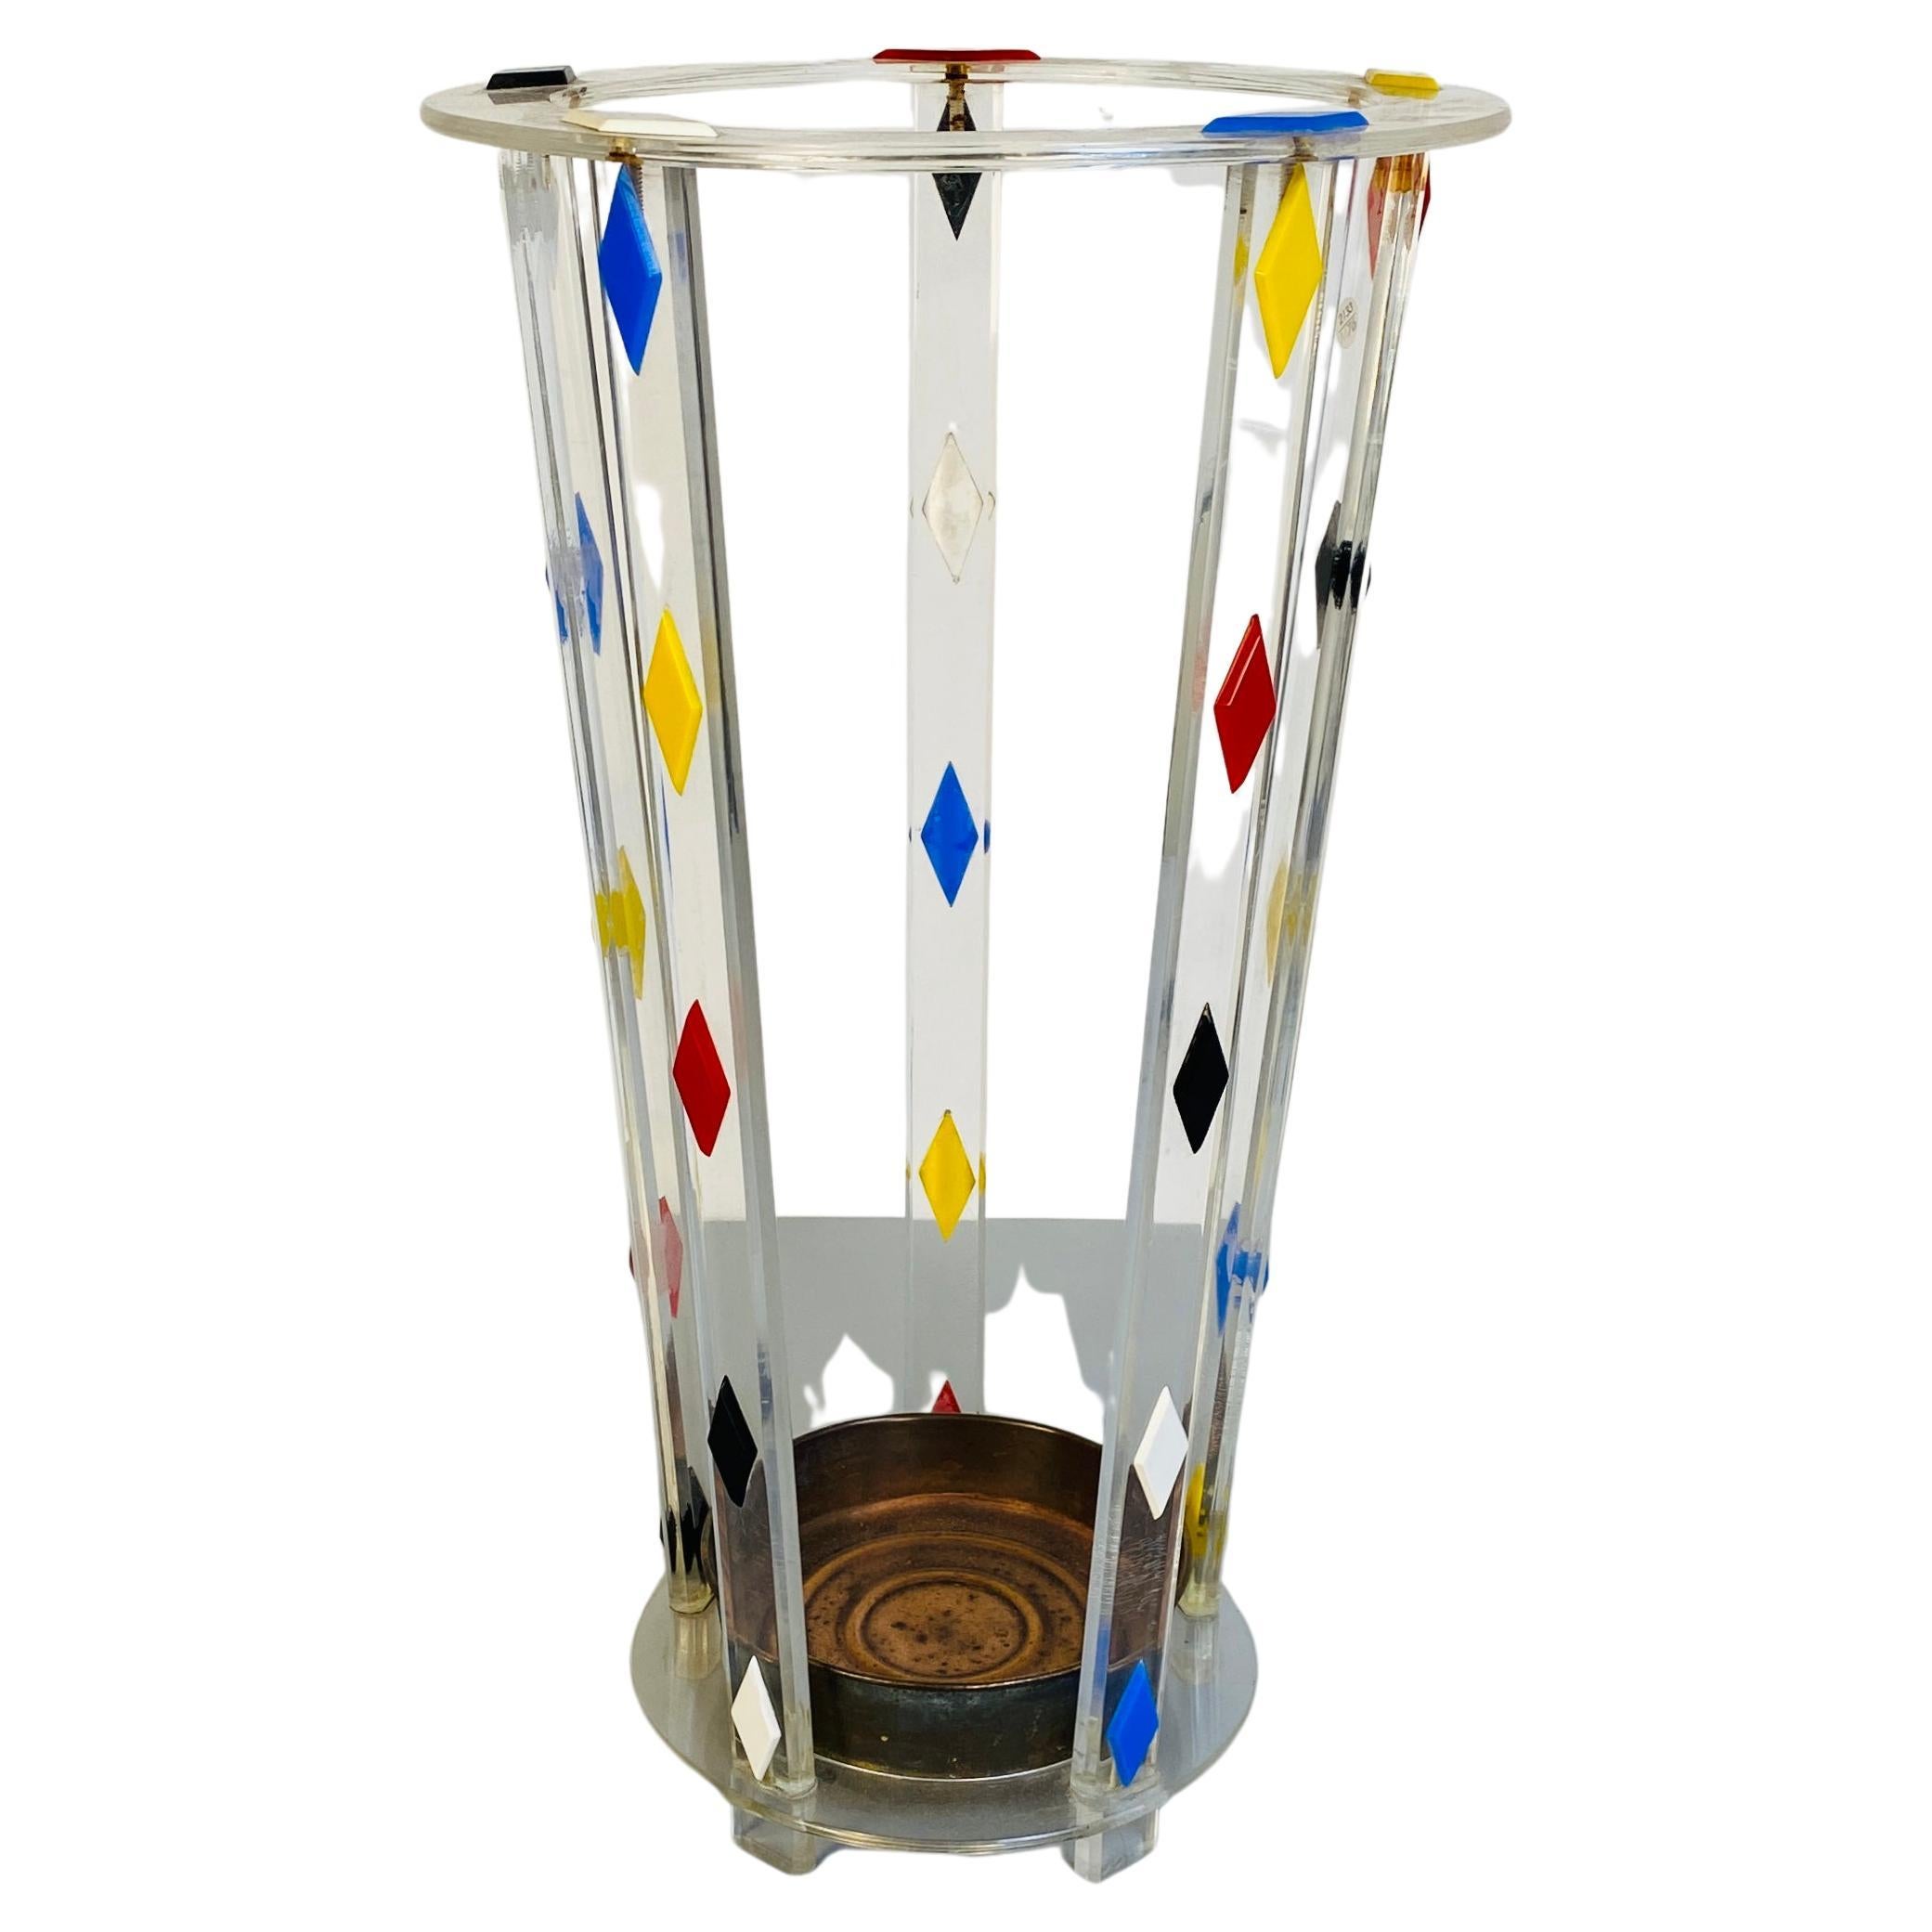 Italian Mid-Century Modern plexiglass umbrella Stand with bronze bowl, 1980s
Plexiglass umbrella Stand in transparent plexiglass and colored rhombuses, with a bronze bowl on the base, 1980s

Good condition, with some signs.

Measures 55x30h cm.